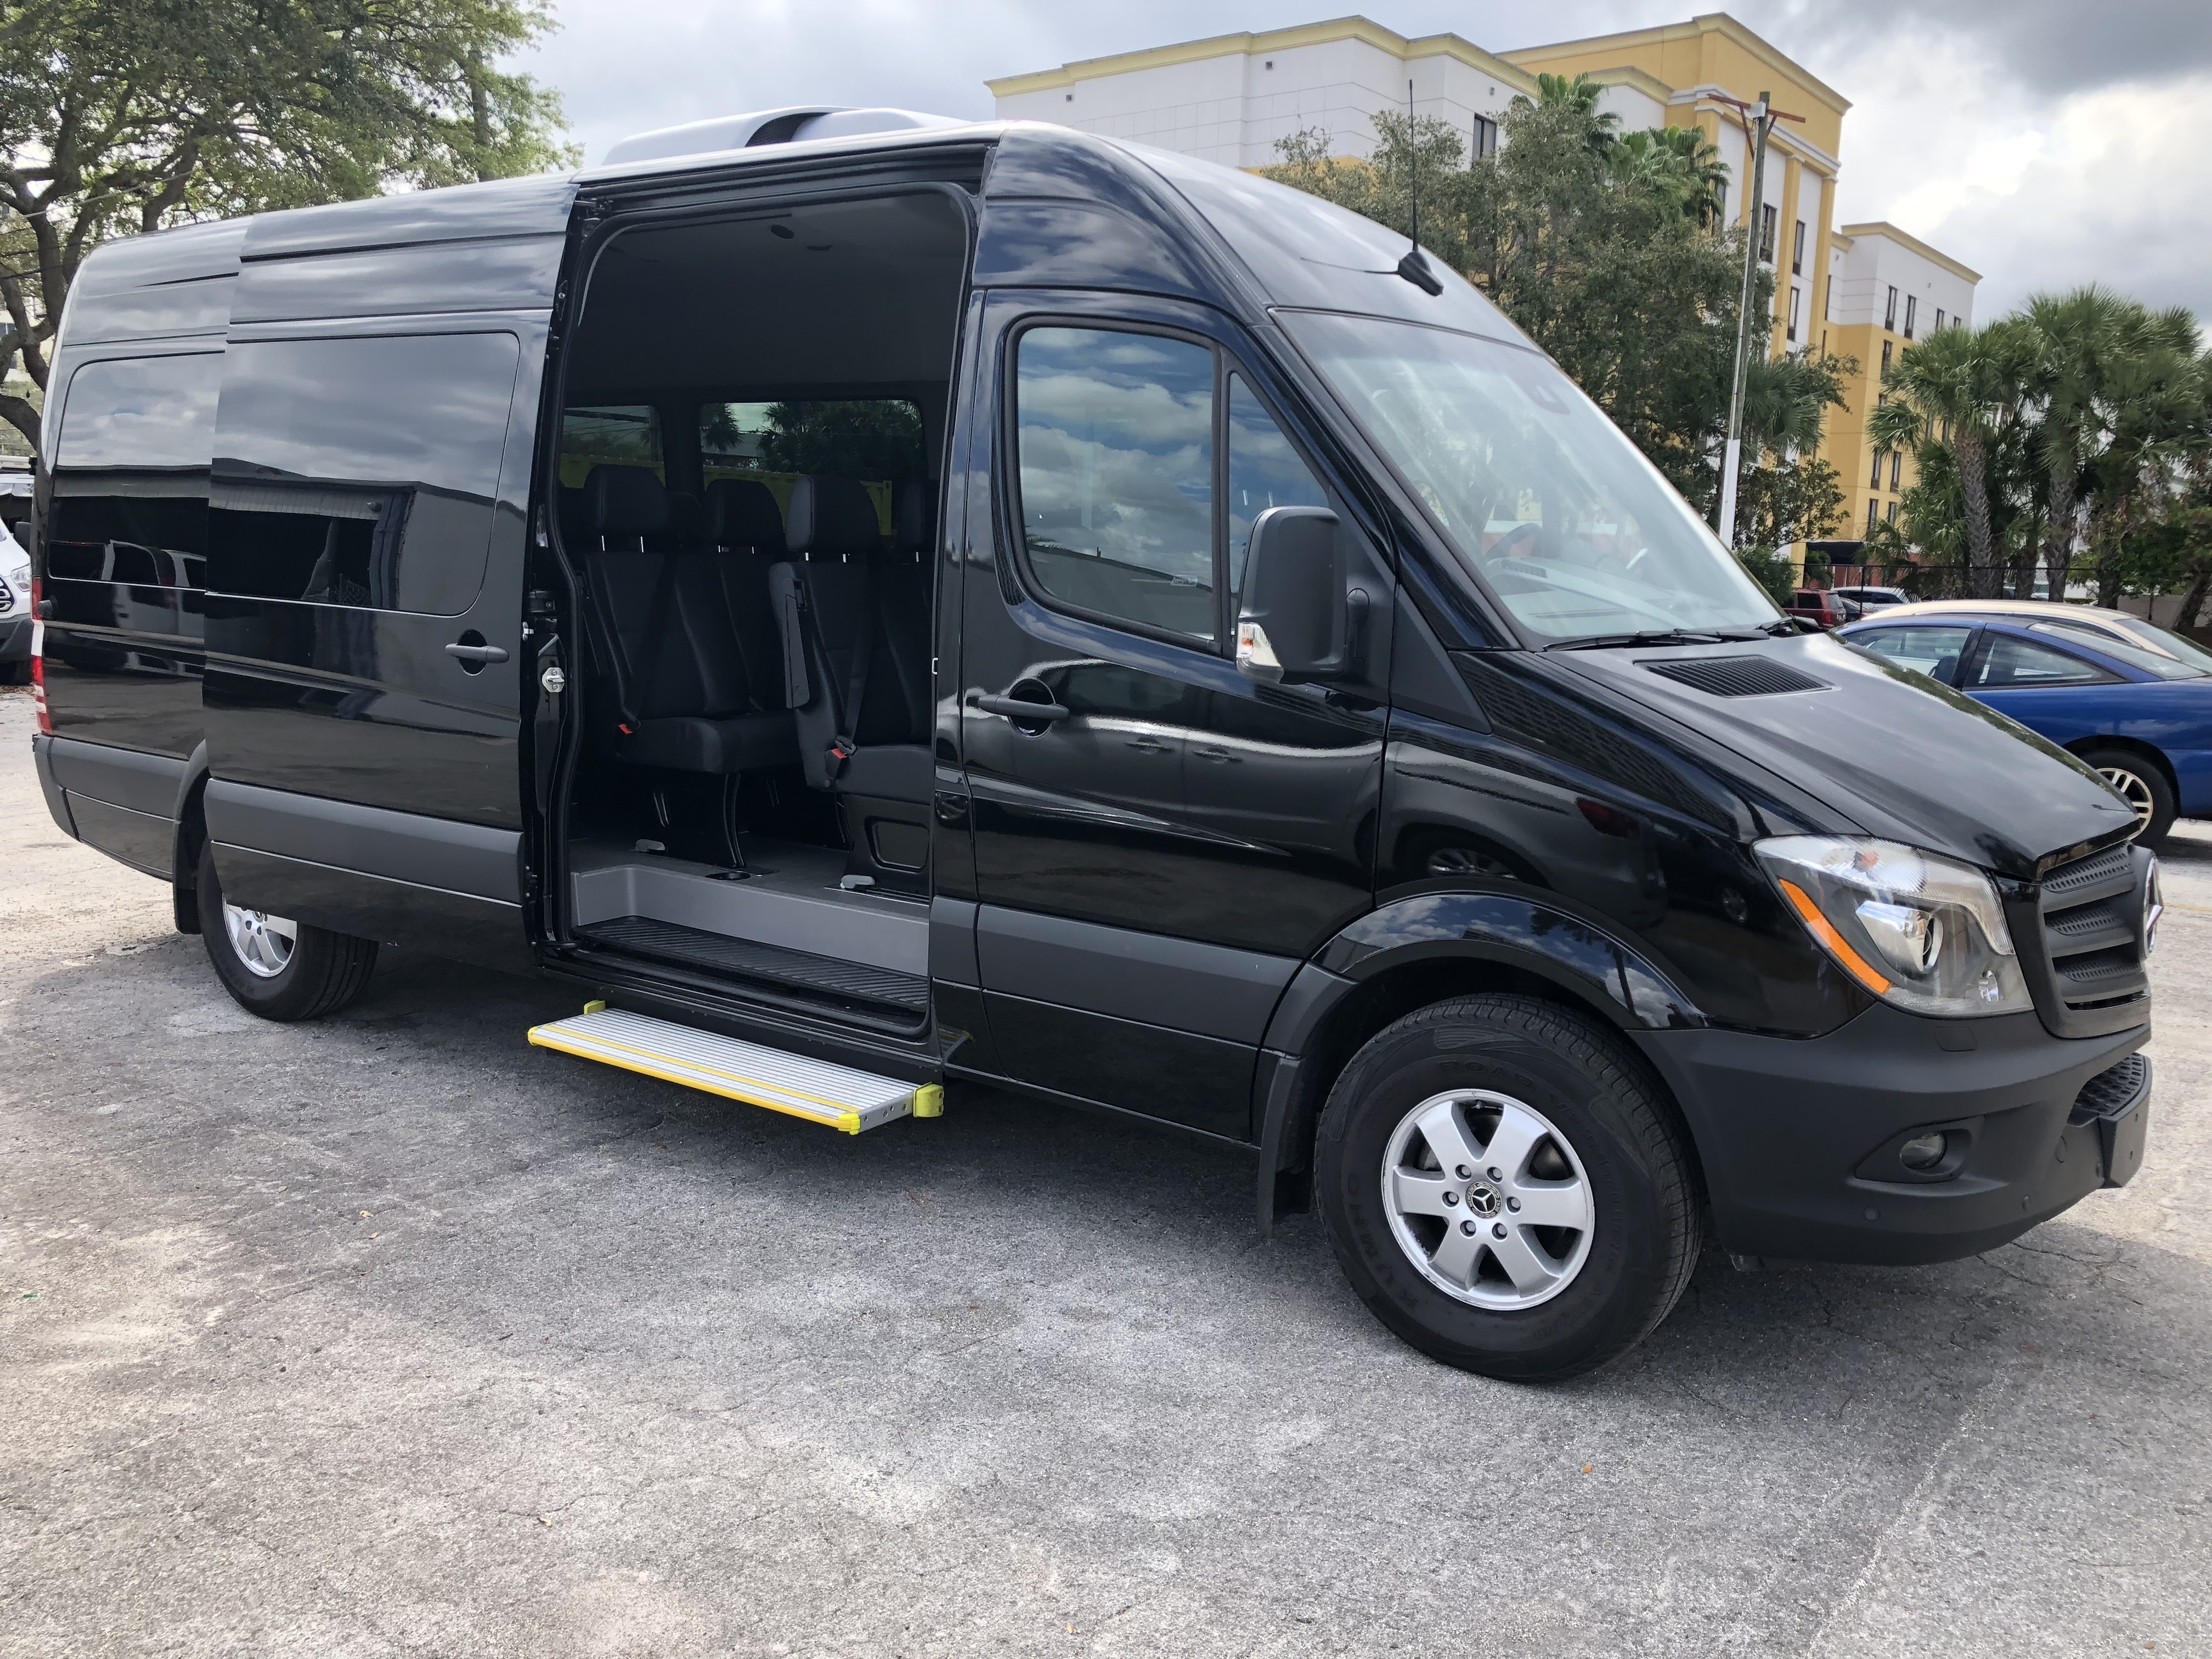 Using Corporate Rental Vans for Employee and Client Events